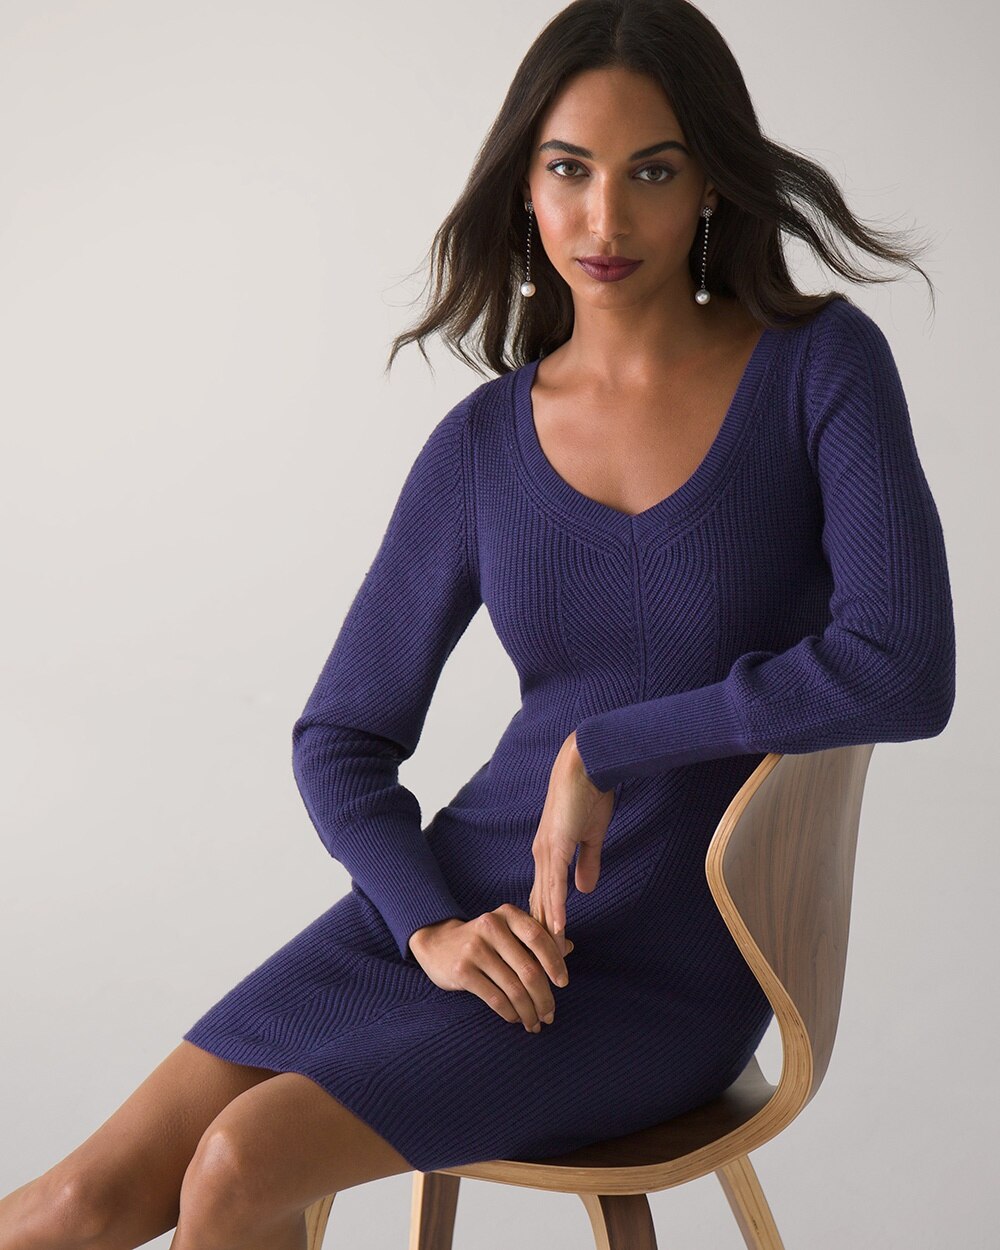 Long Sleeve Sweater Dress video preview image, click to start video